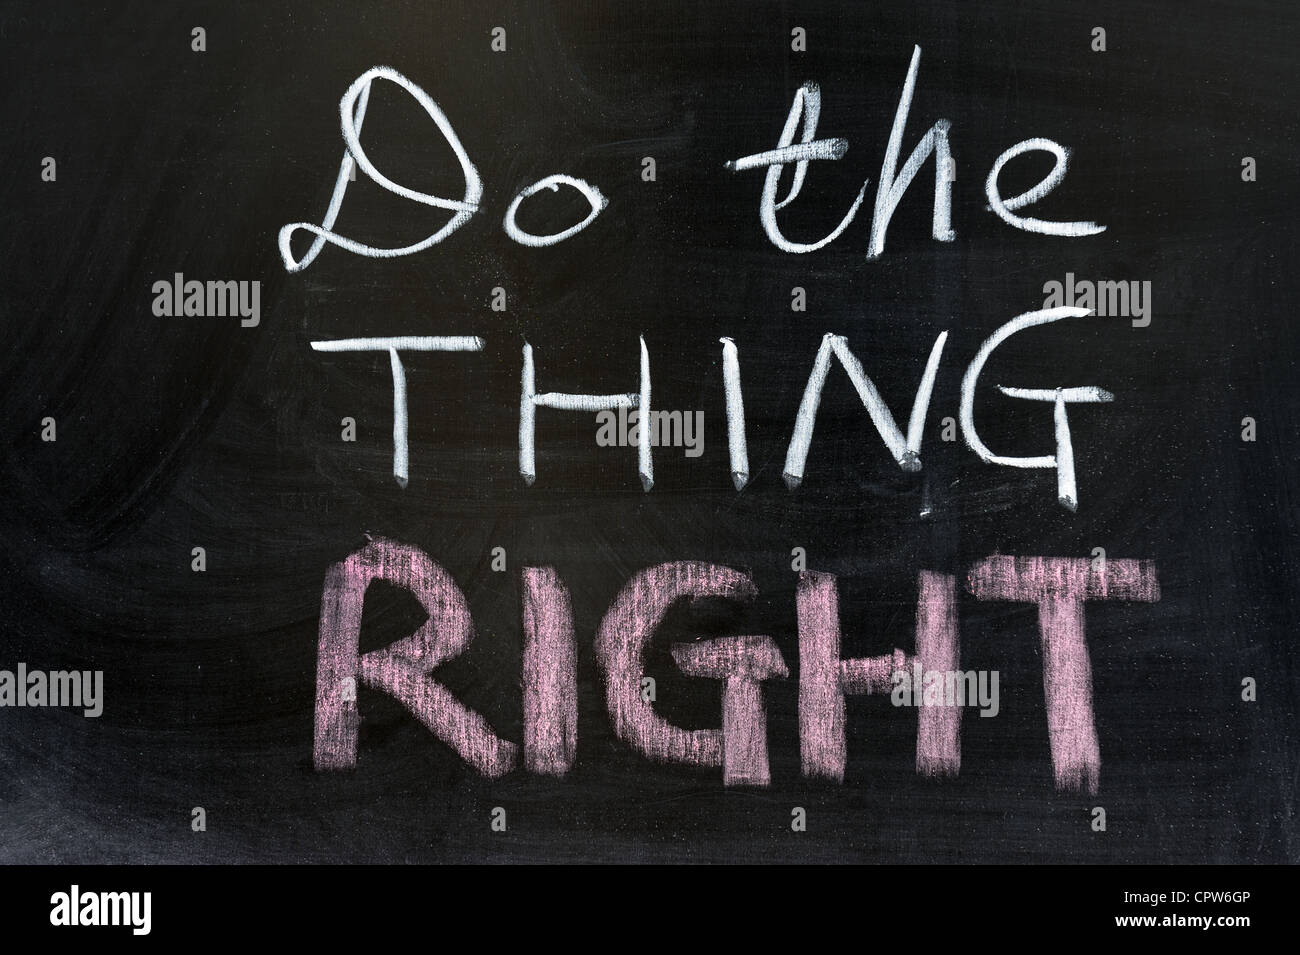 Chalk drawing - Do the thing right Stock Photo